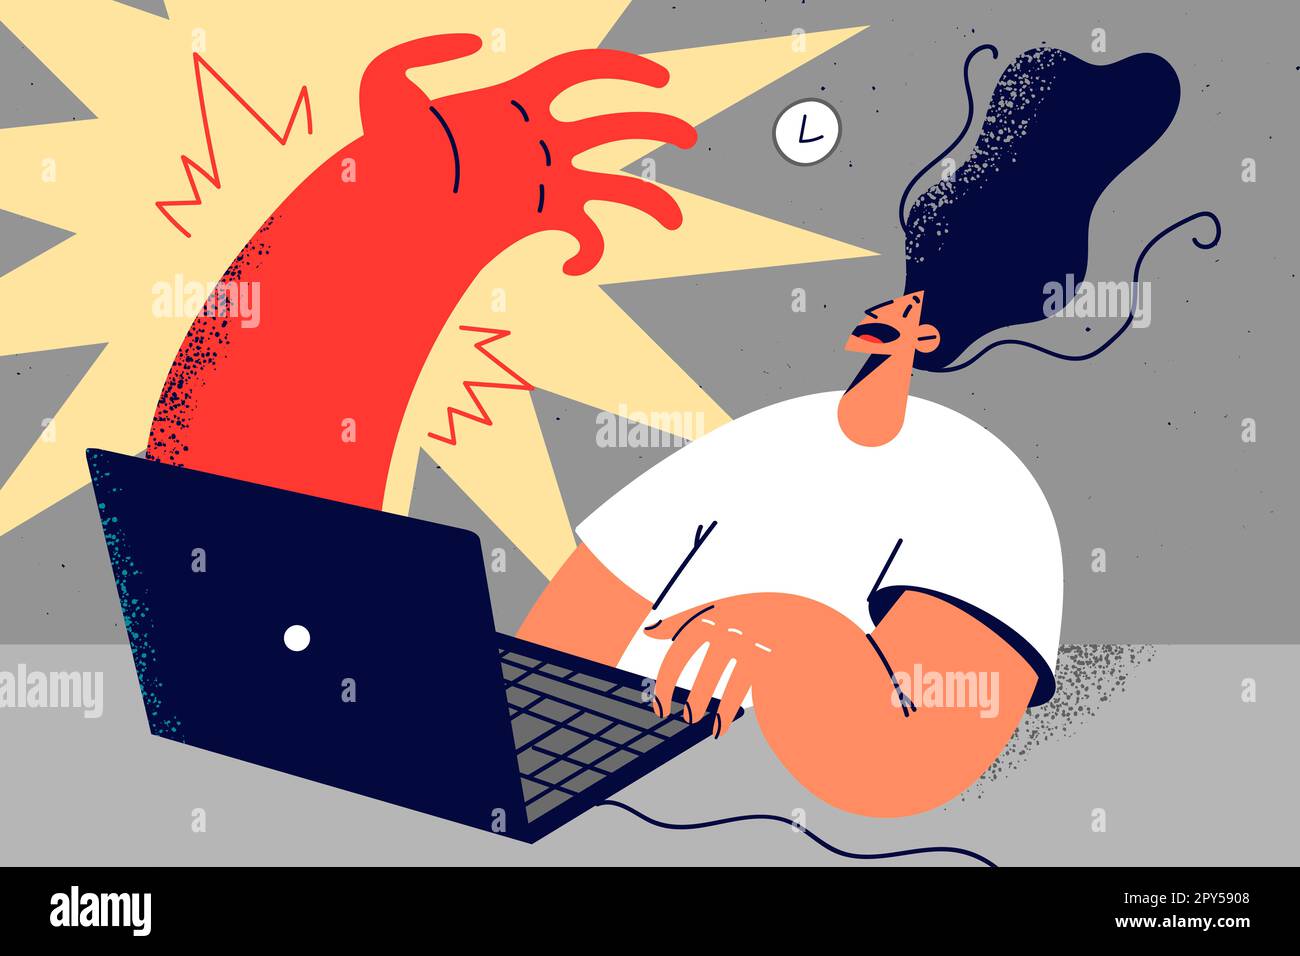 Scared woman look at huge hand appearing from laptop screen. Big hand arise from computer attack terrified female employee. Vector illustration. Stock Photo